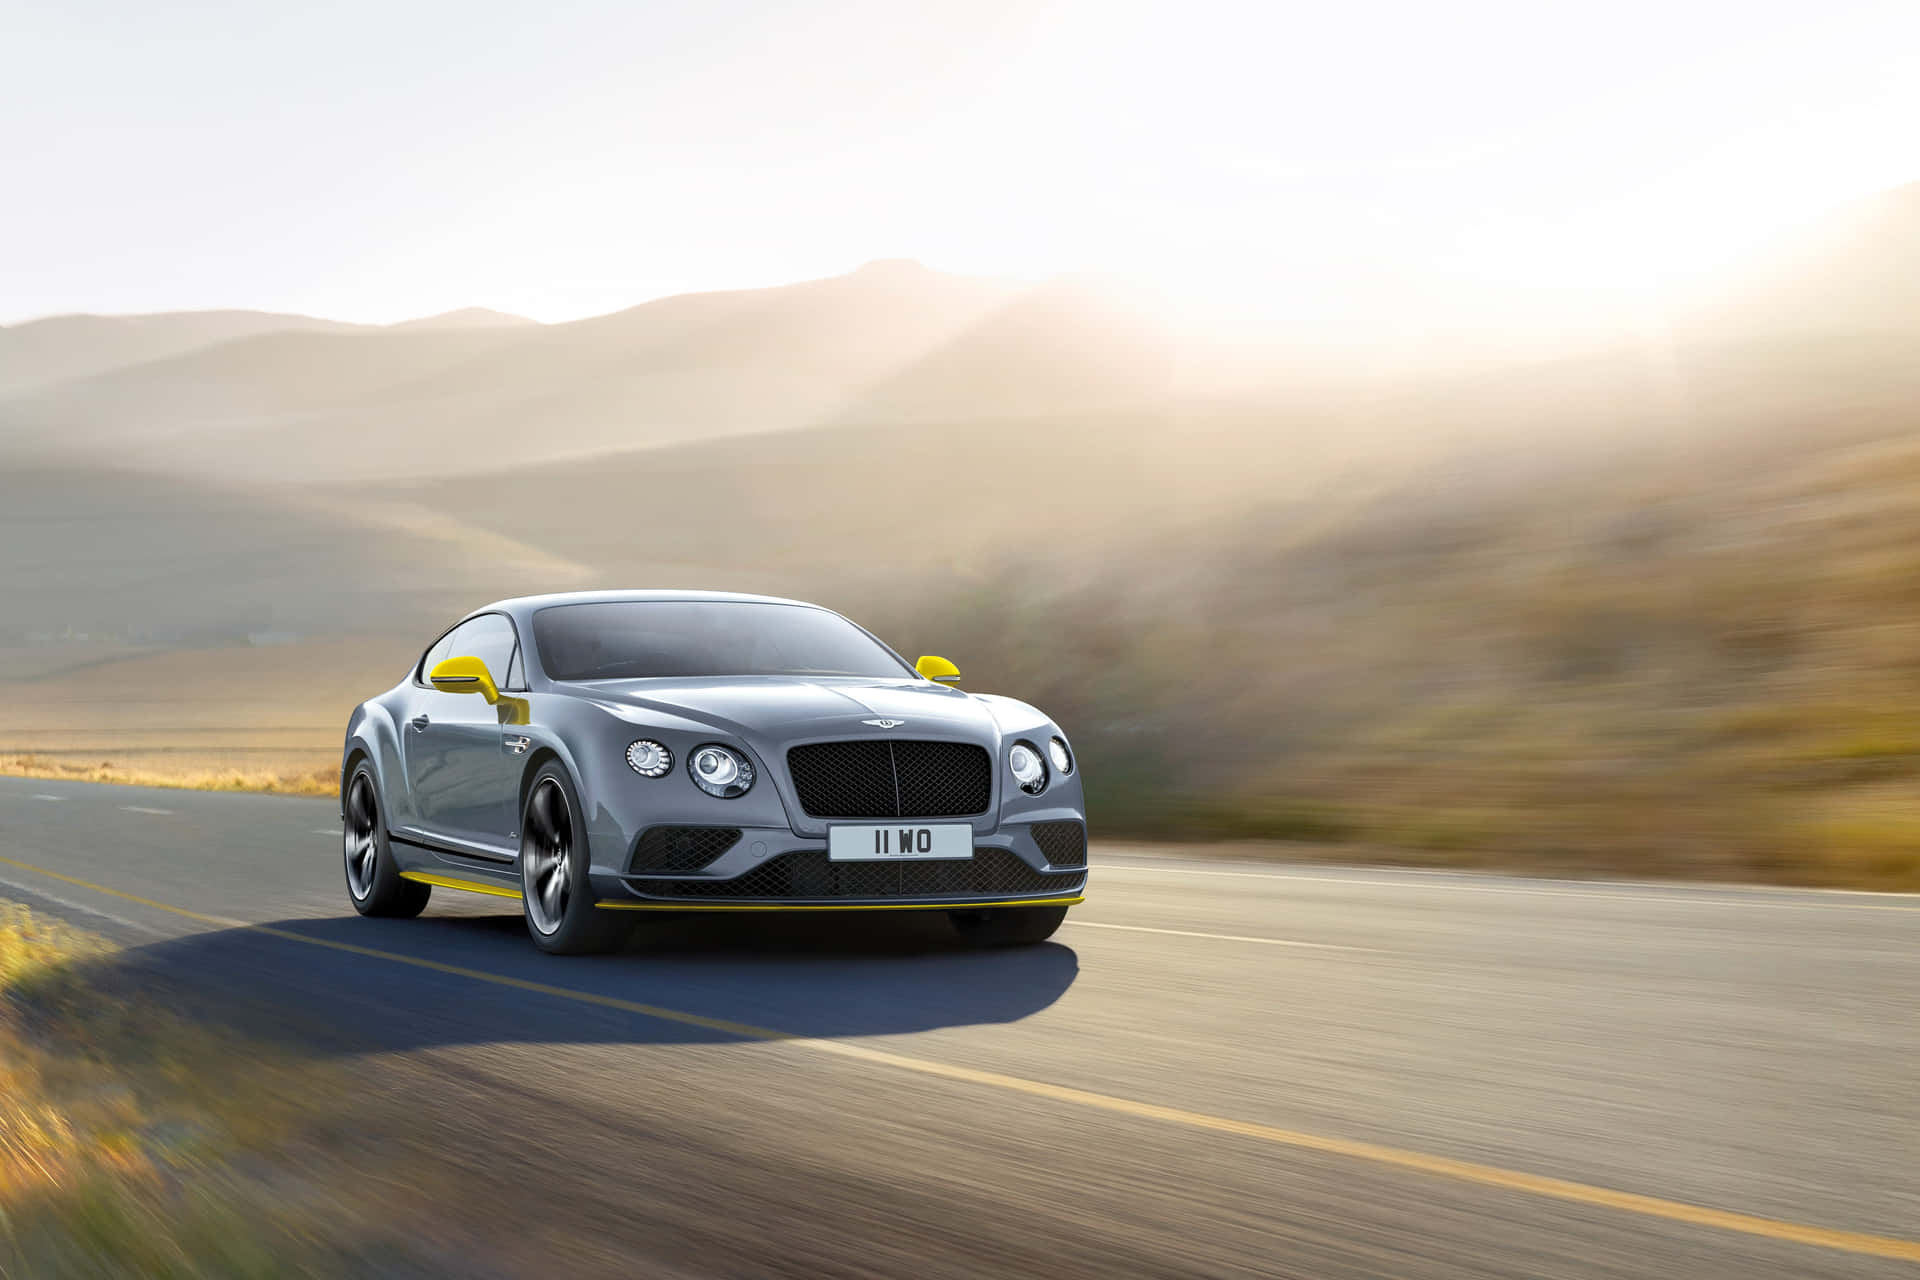 Caption: Sleek and Sophisticated Bentley Continental GT Wallpaper